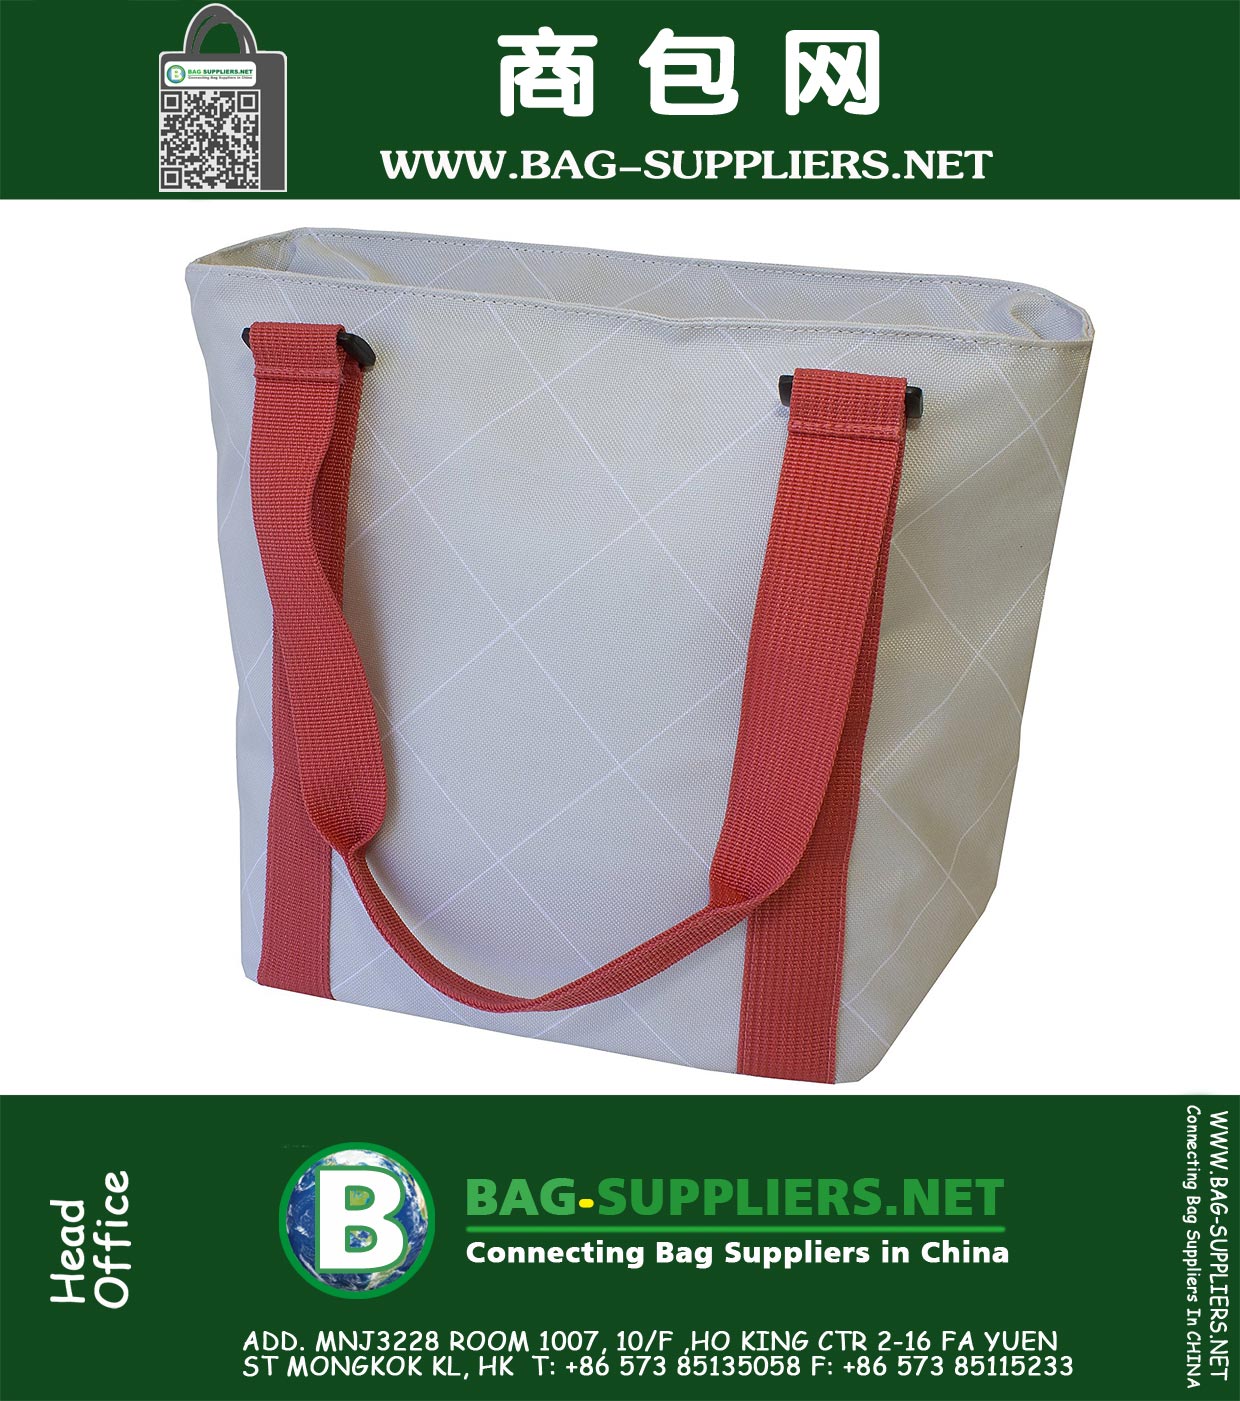 Insulated Lunch Bag - Large Carrier Tote With Zipper Closure